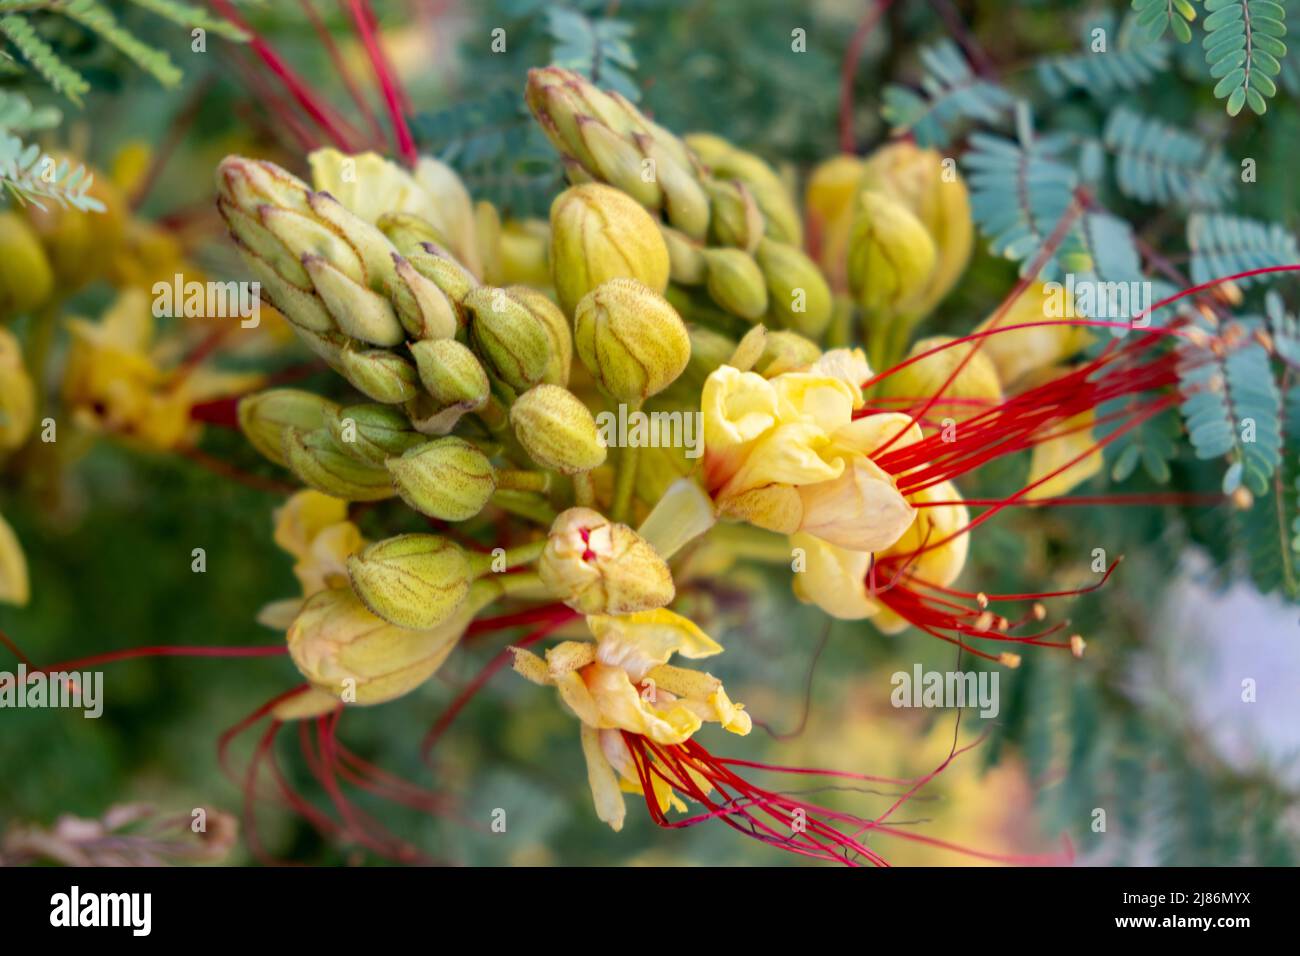 Erythrostemon Gilliesii or Bird Of Paradise shrub, yellow flower with long red stamen. Blooming flora, tropical wild plant with toxic green seed. Clos Stock Photo